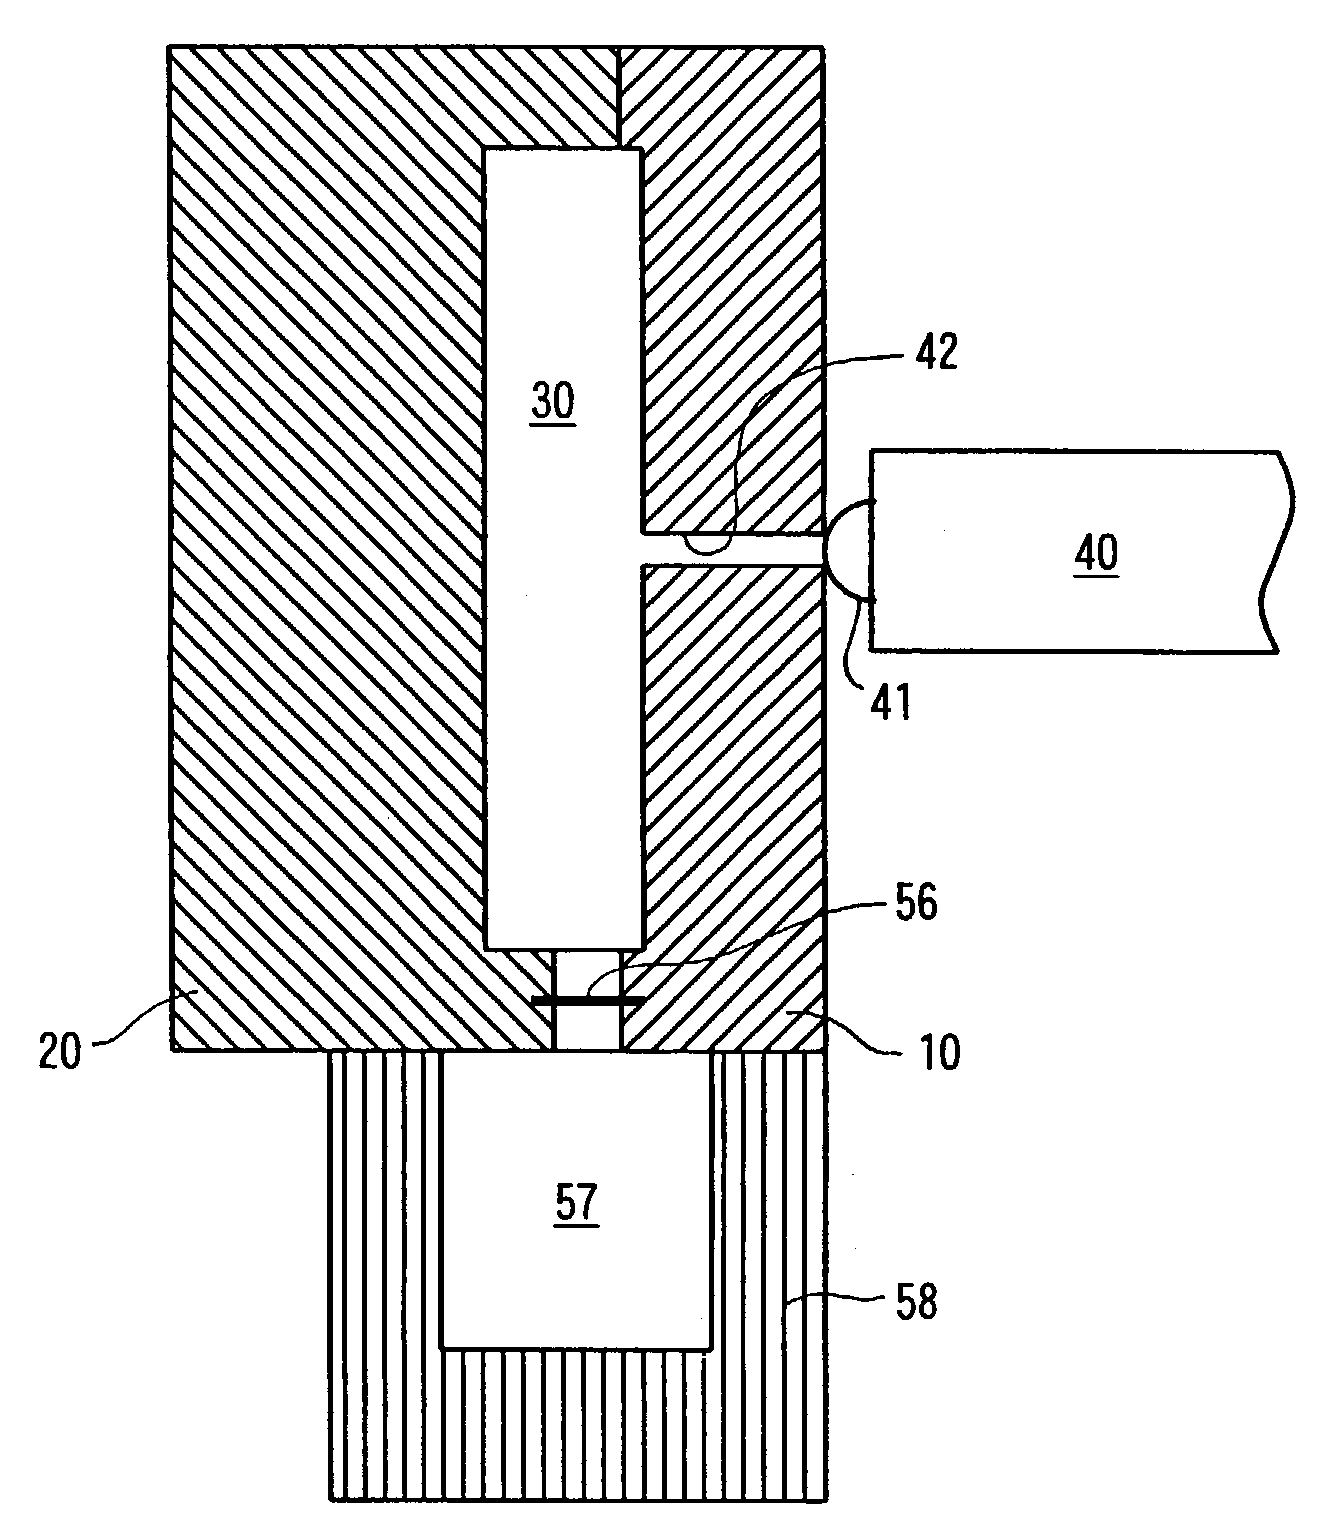 Method for formation of polymer